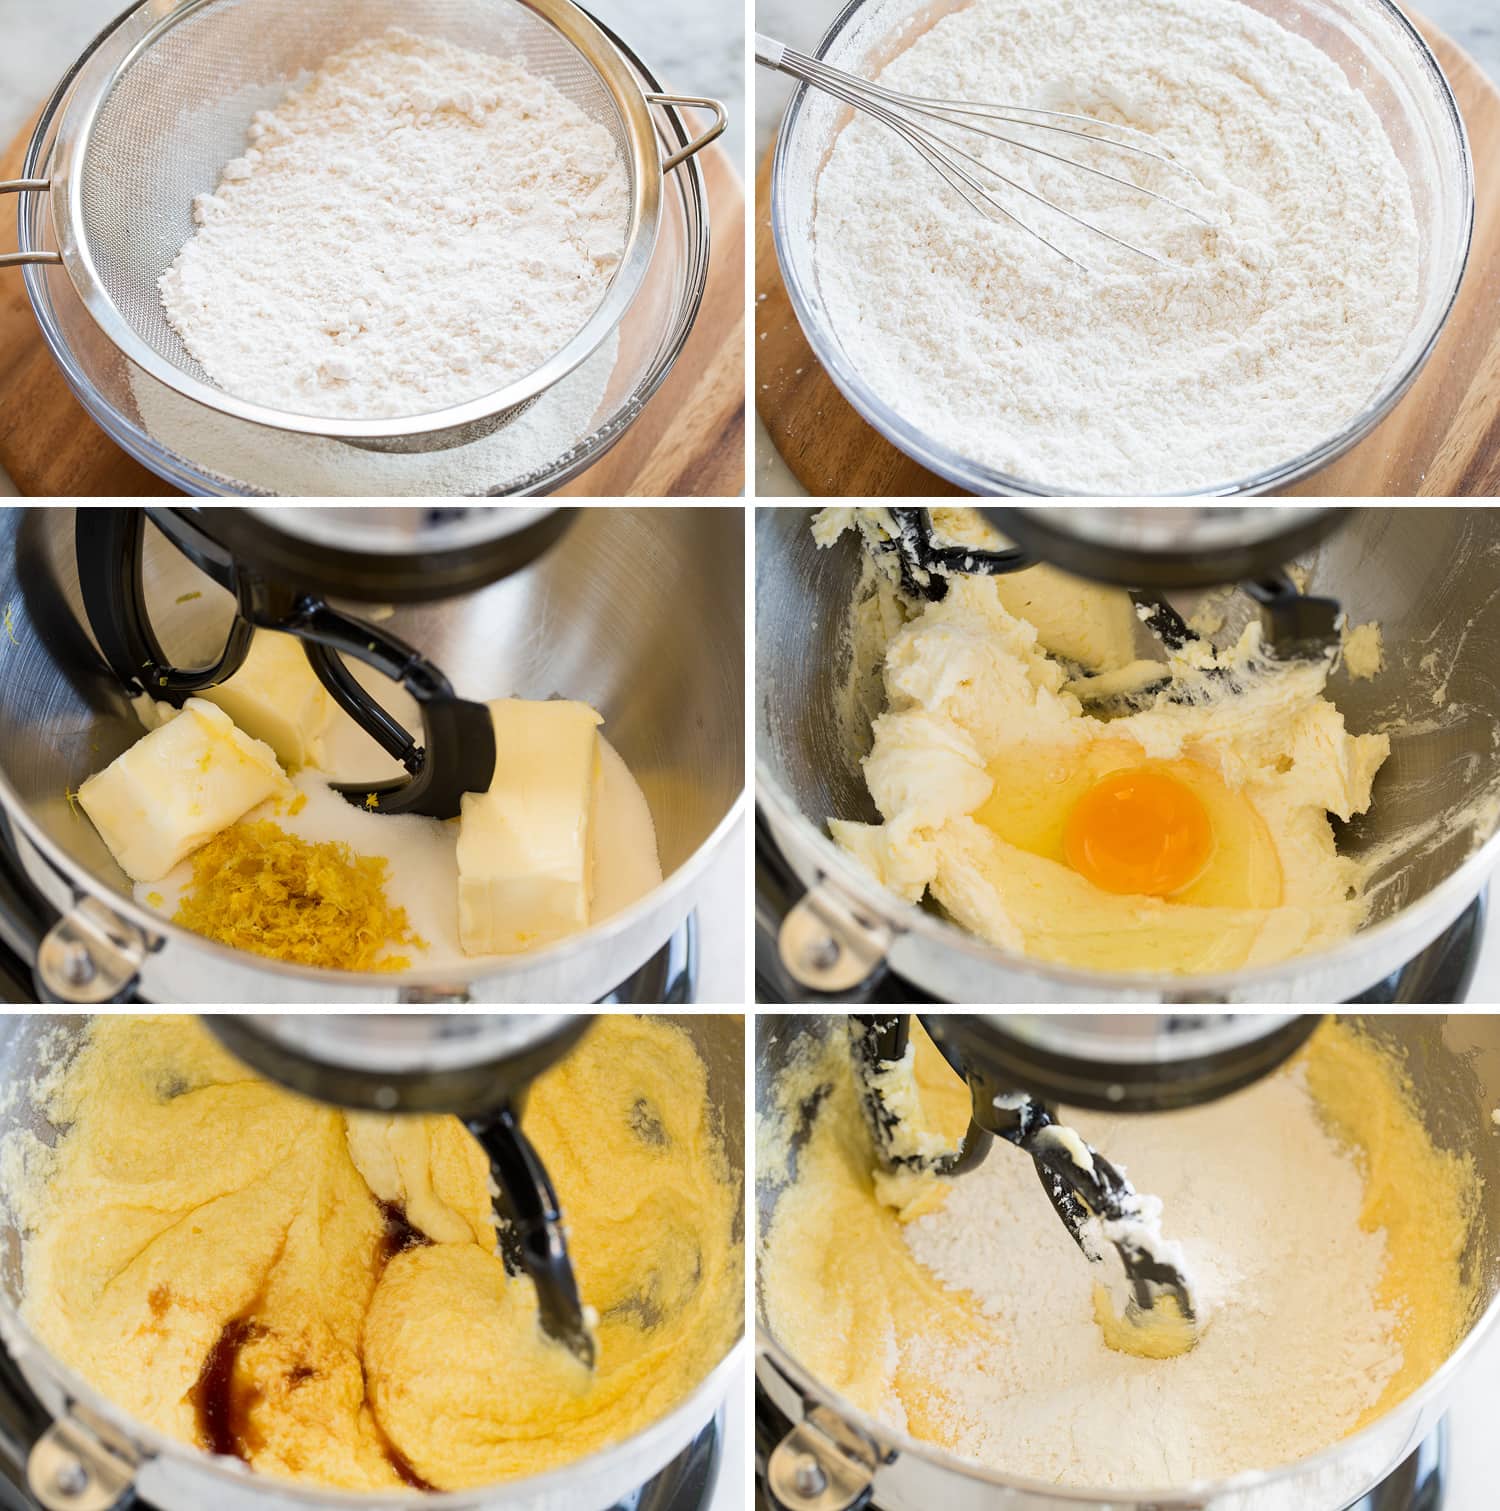 Steps of making lemon blueberry cake batter in a stand mixer bowl.